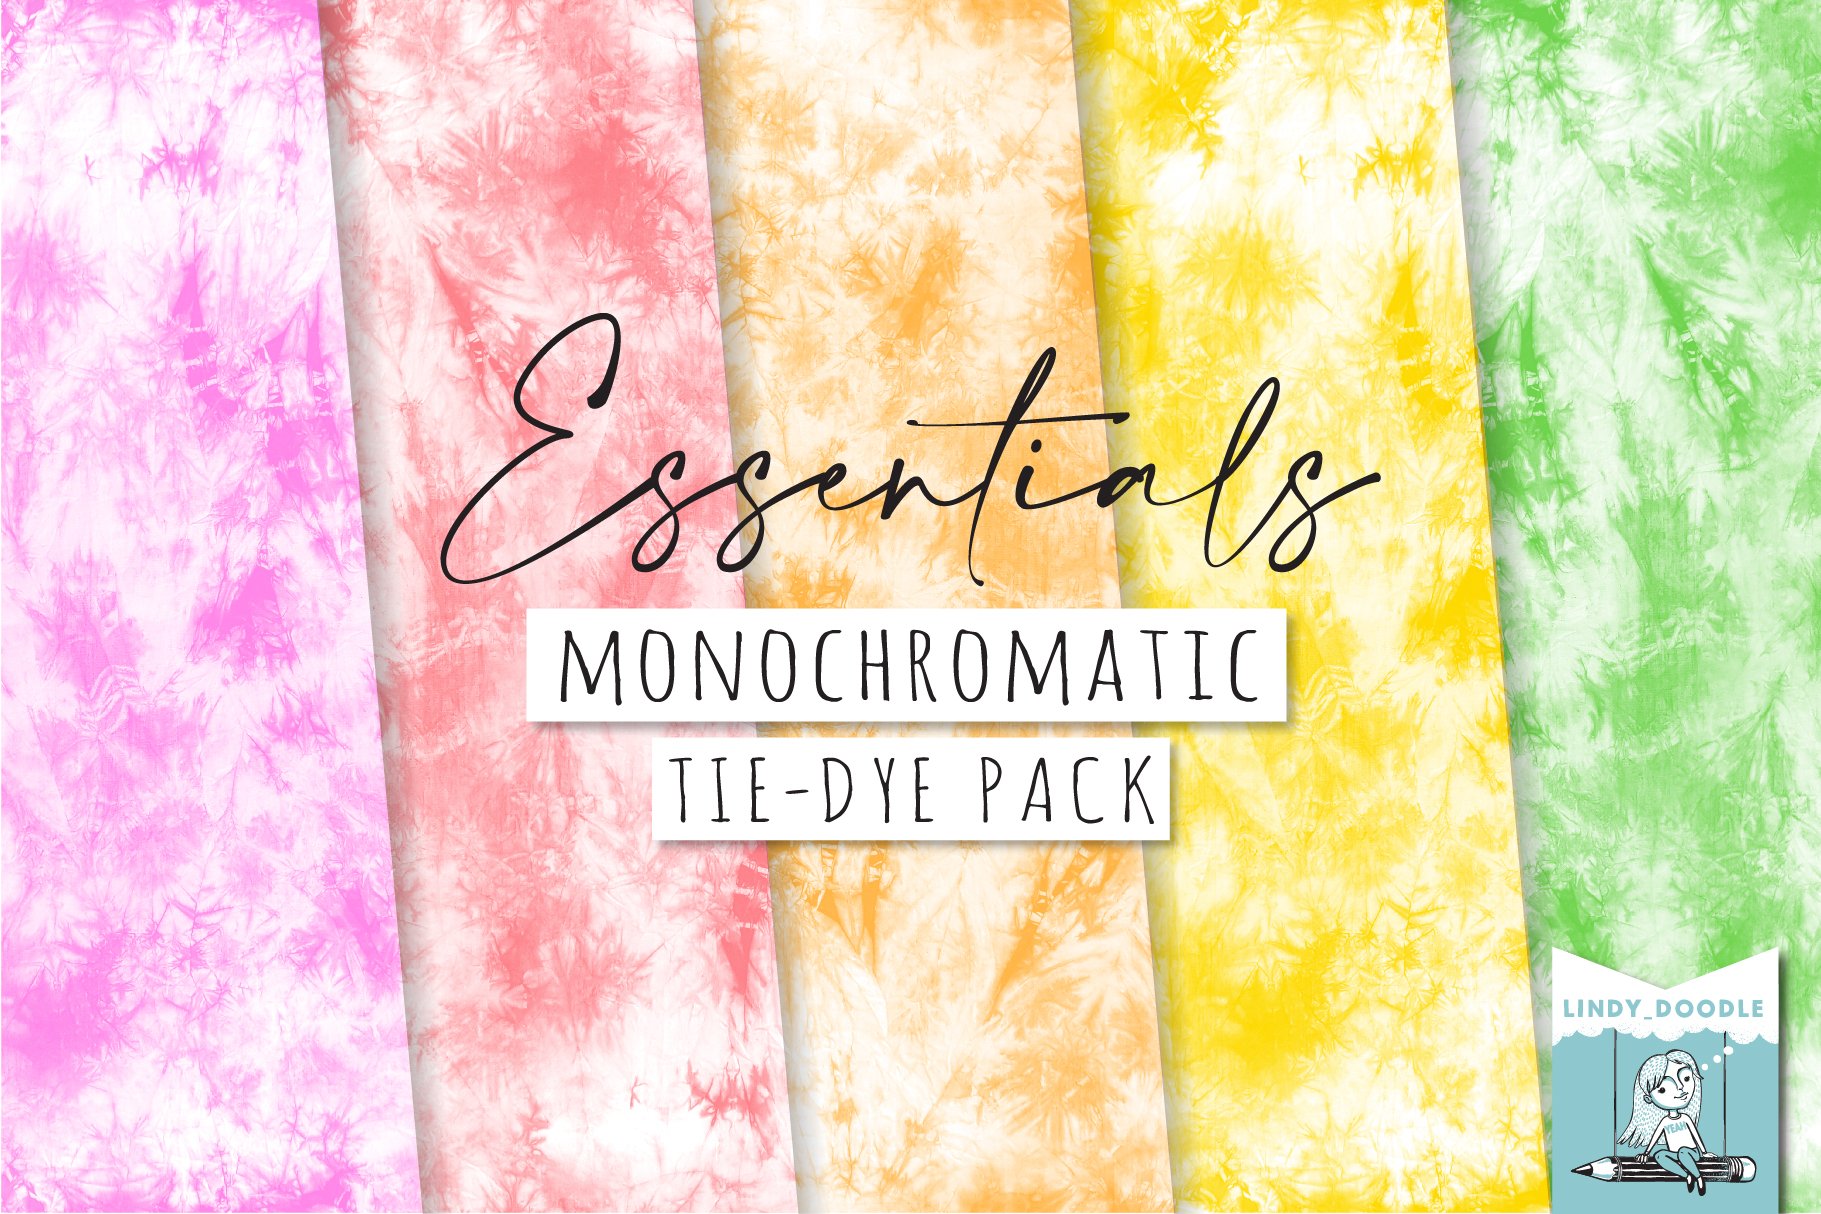 Monochromatic Tie Dye Pack cover image.